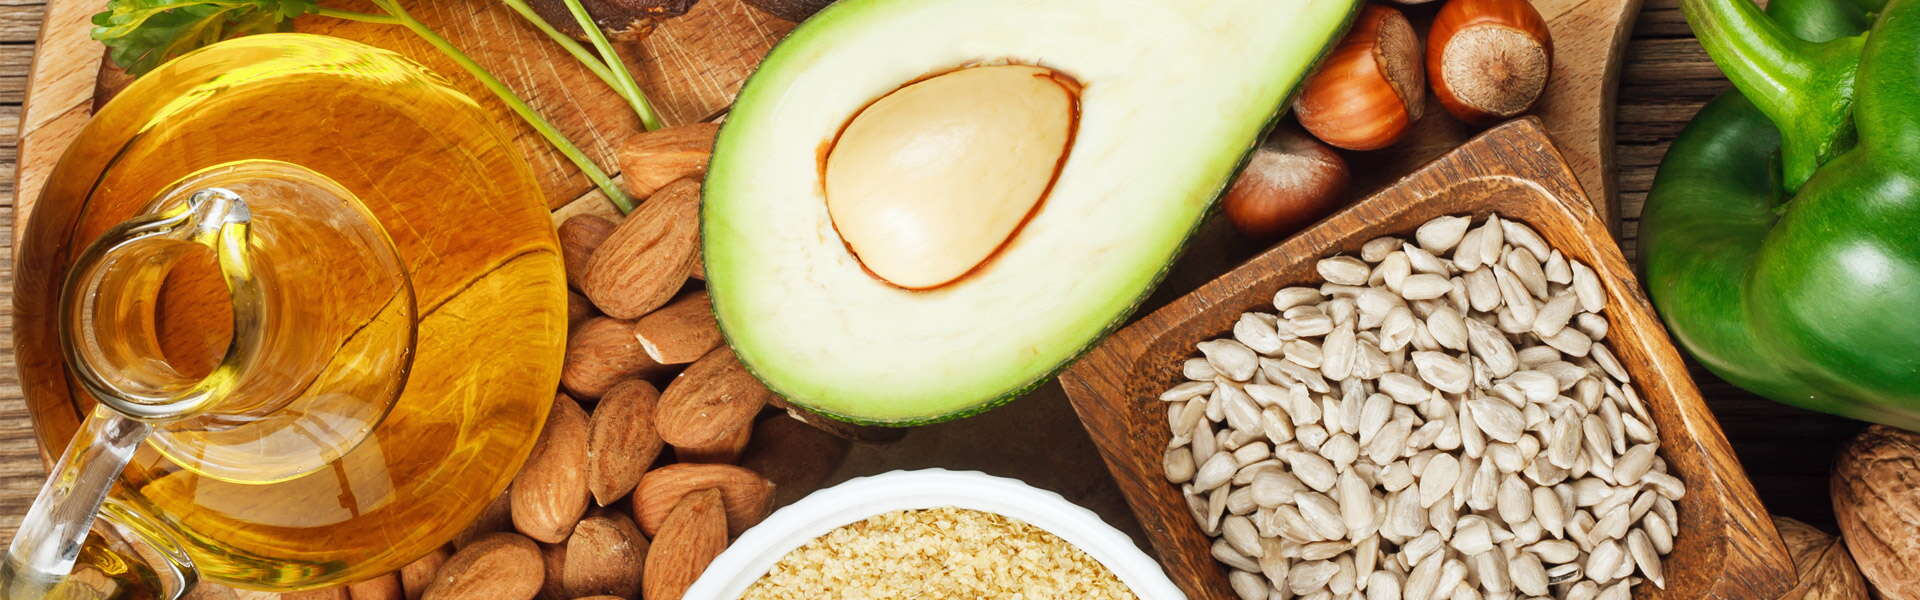 Vitamin E: what you need to know